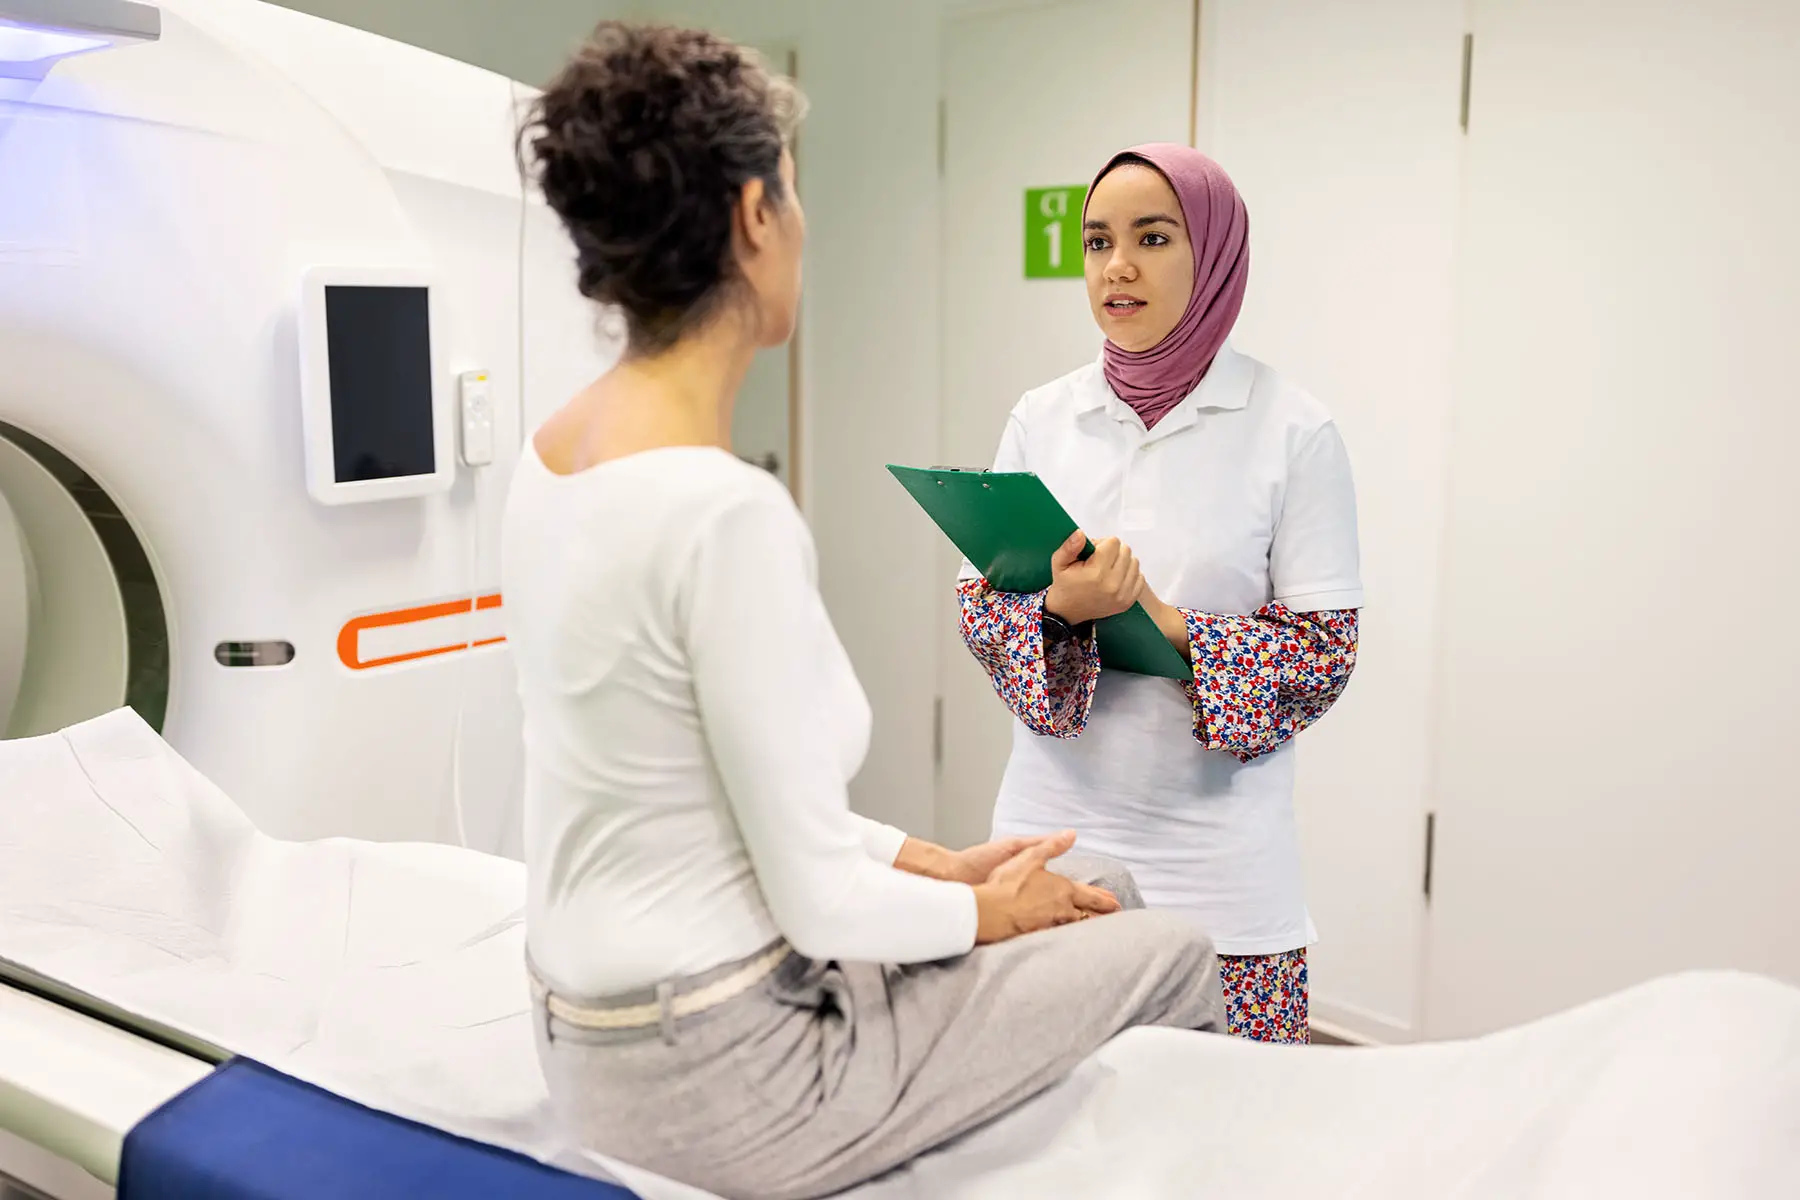 Doctor asking information to female patient before CAT scan test in examination room.